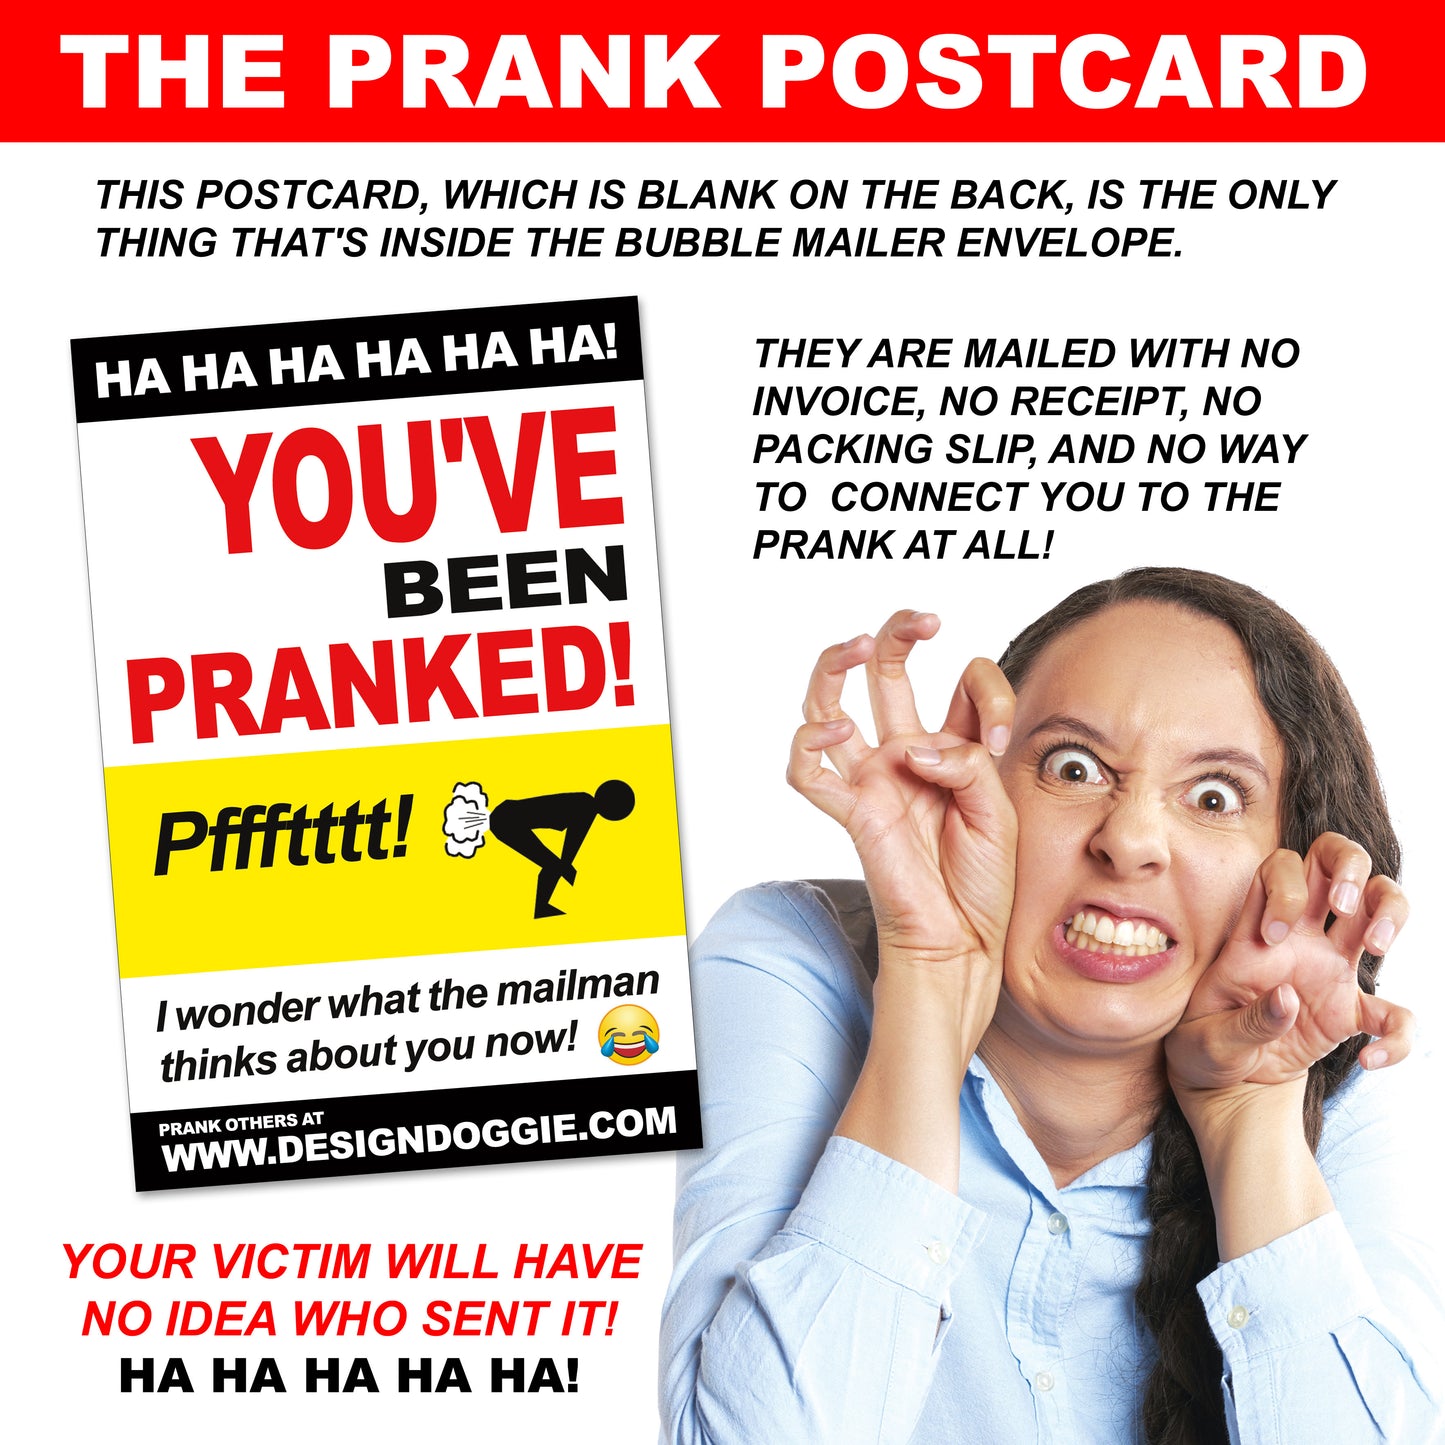 Your Syphilis Cure Is Here embarrassing prank envelope gets mailed directly to your victims 100% anonymously!